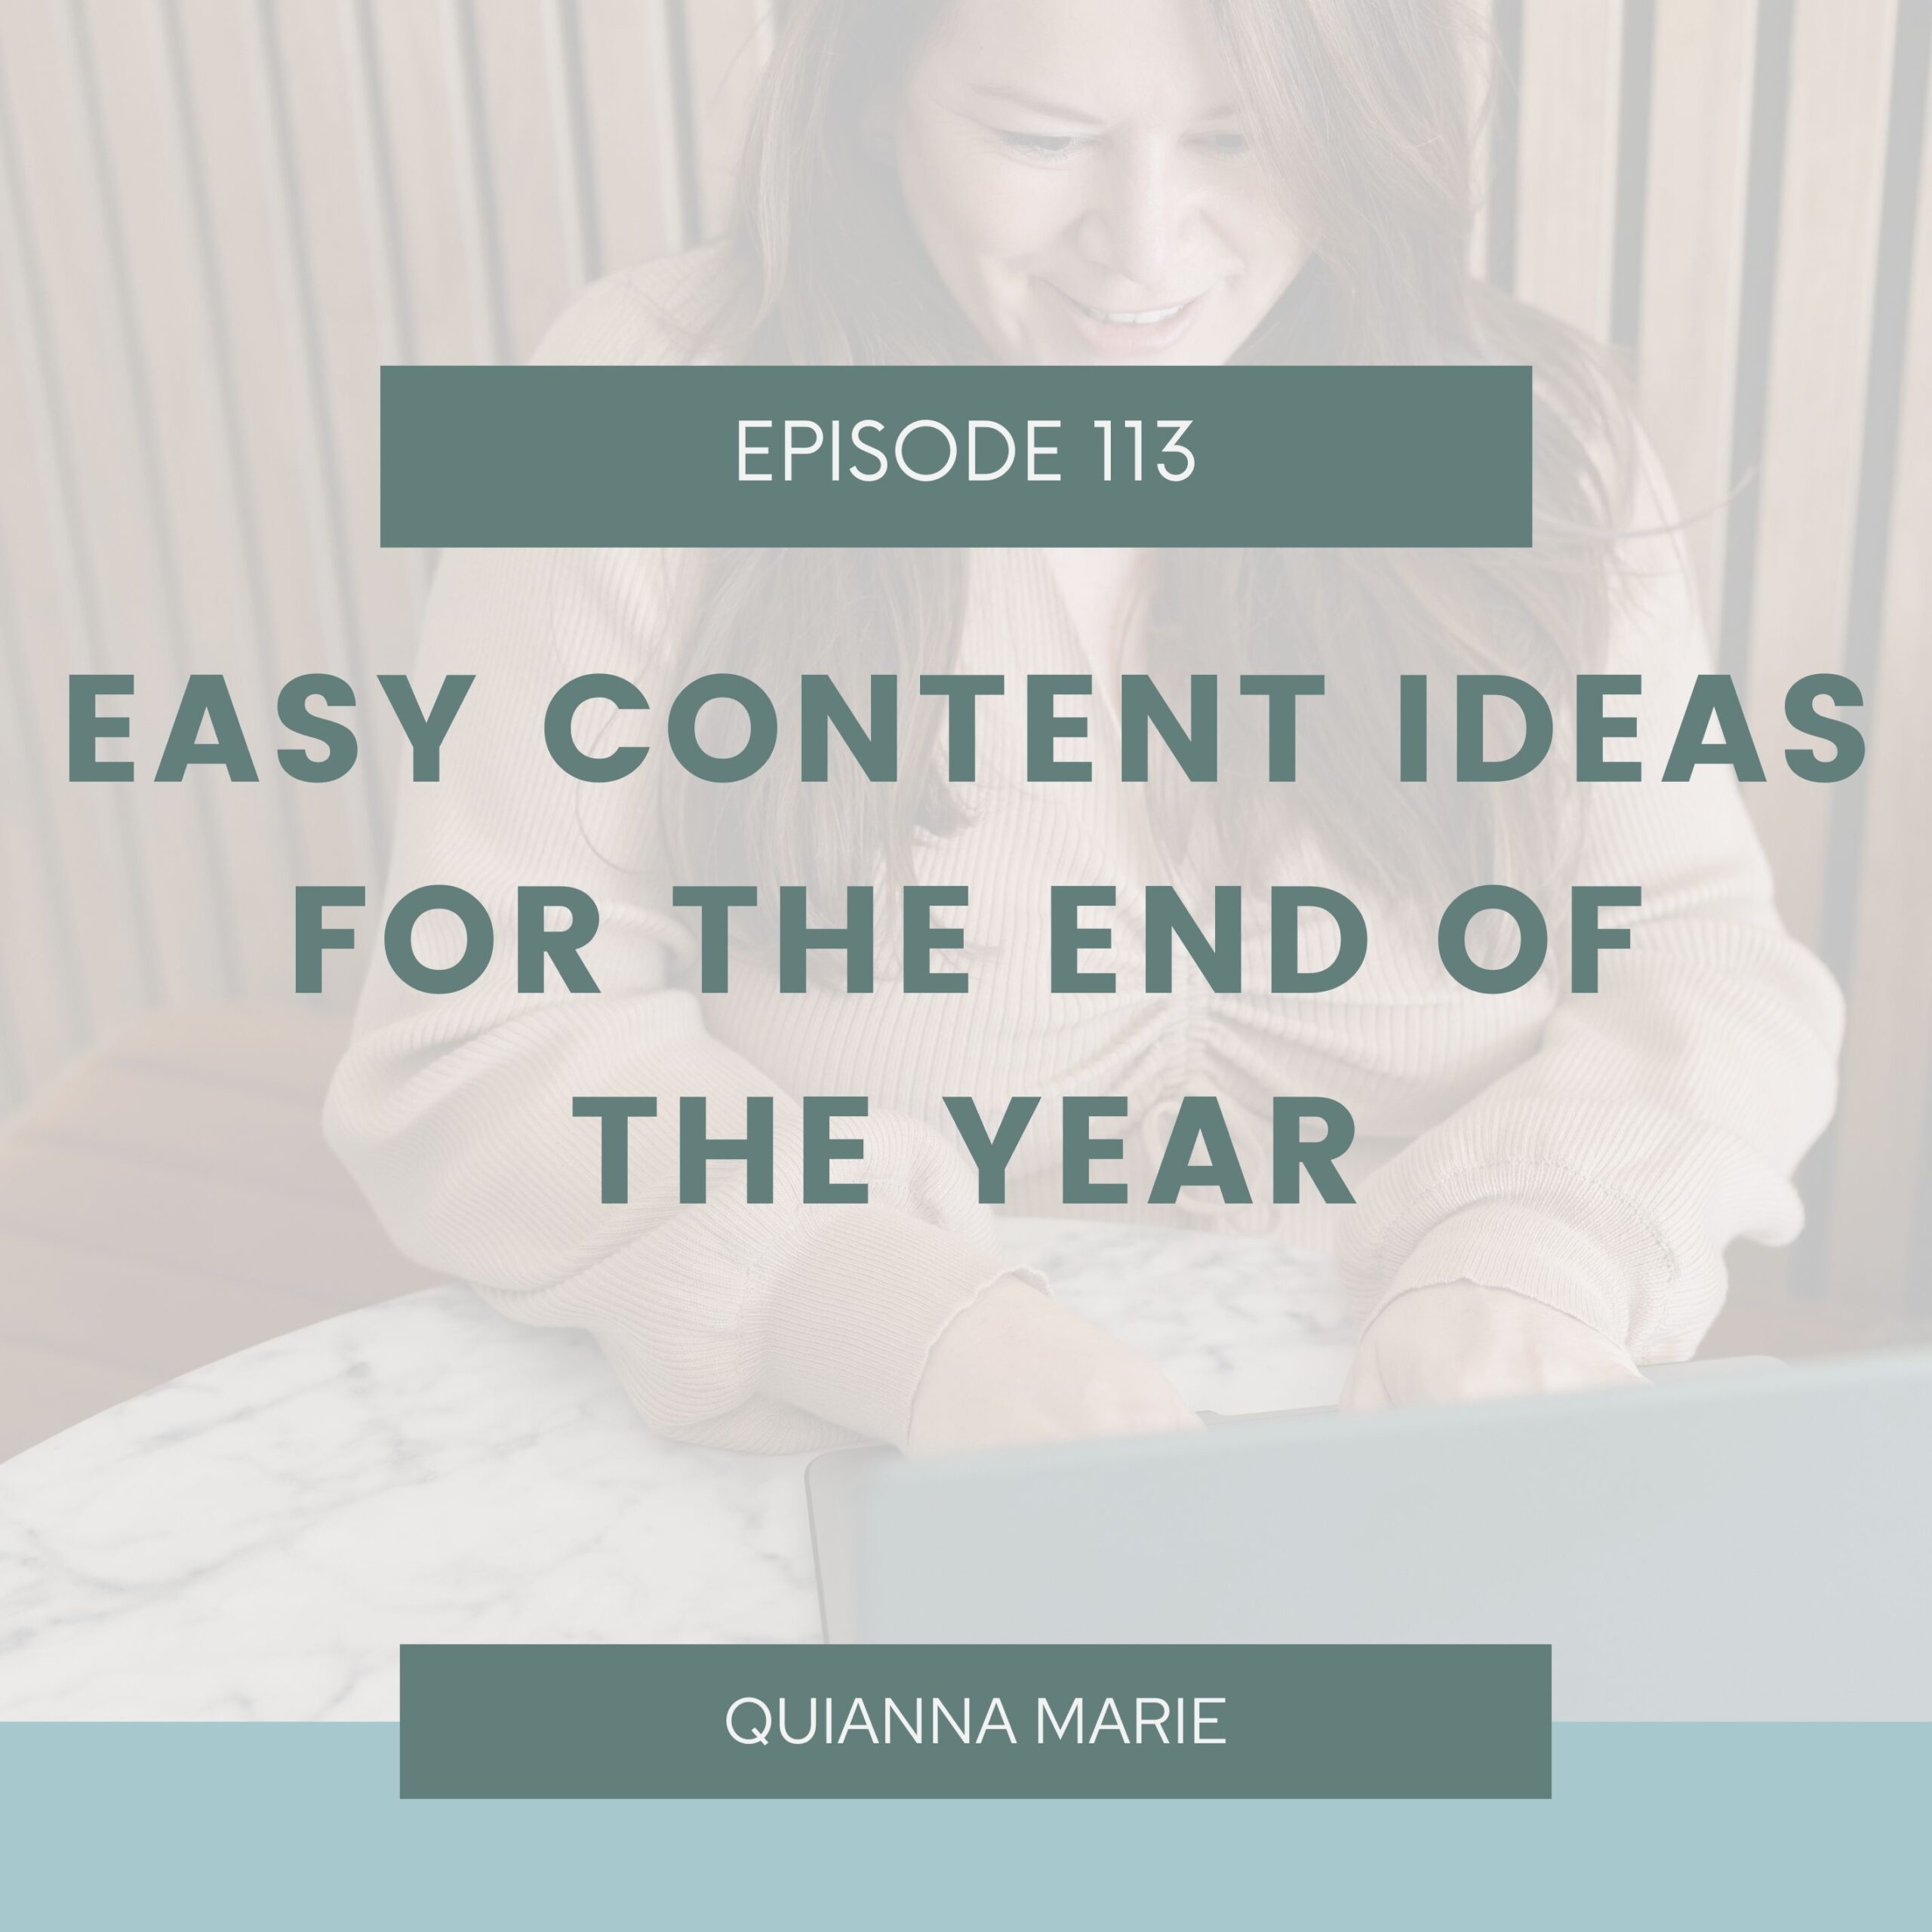 Easy Content Ideas For The End of The Year - Quianna Marie